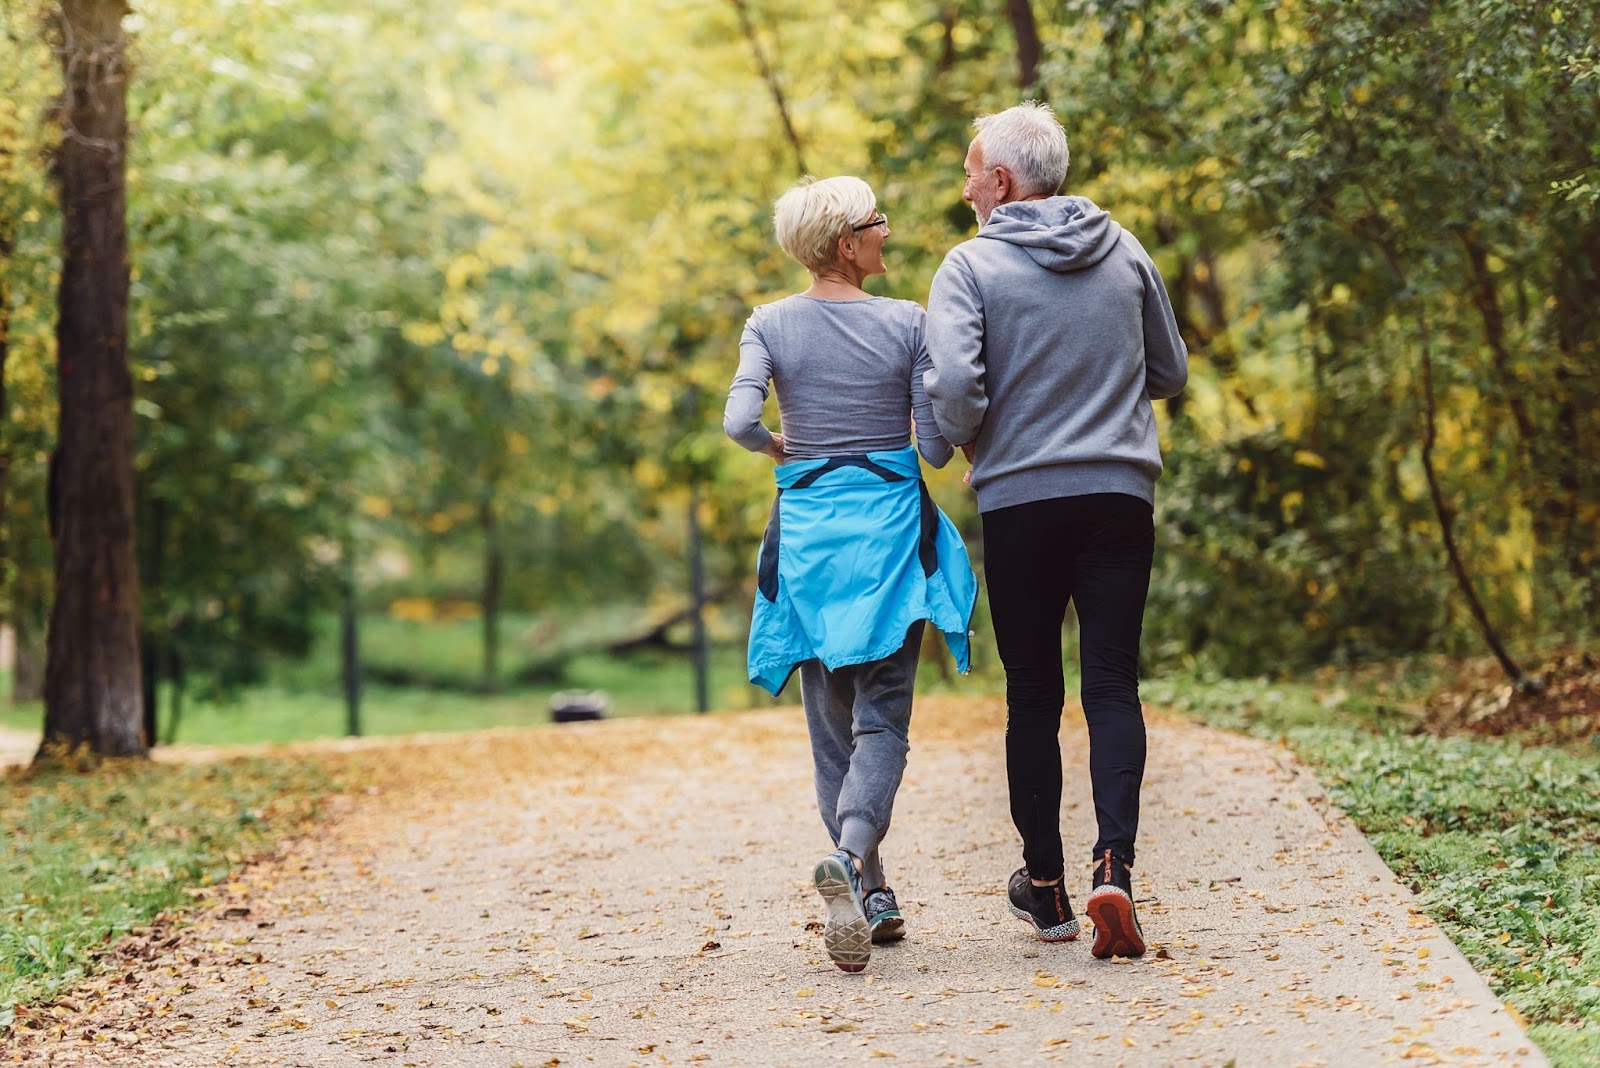 Elderly couple walking in a park together